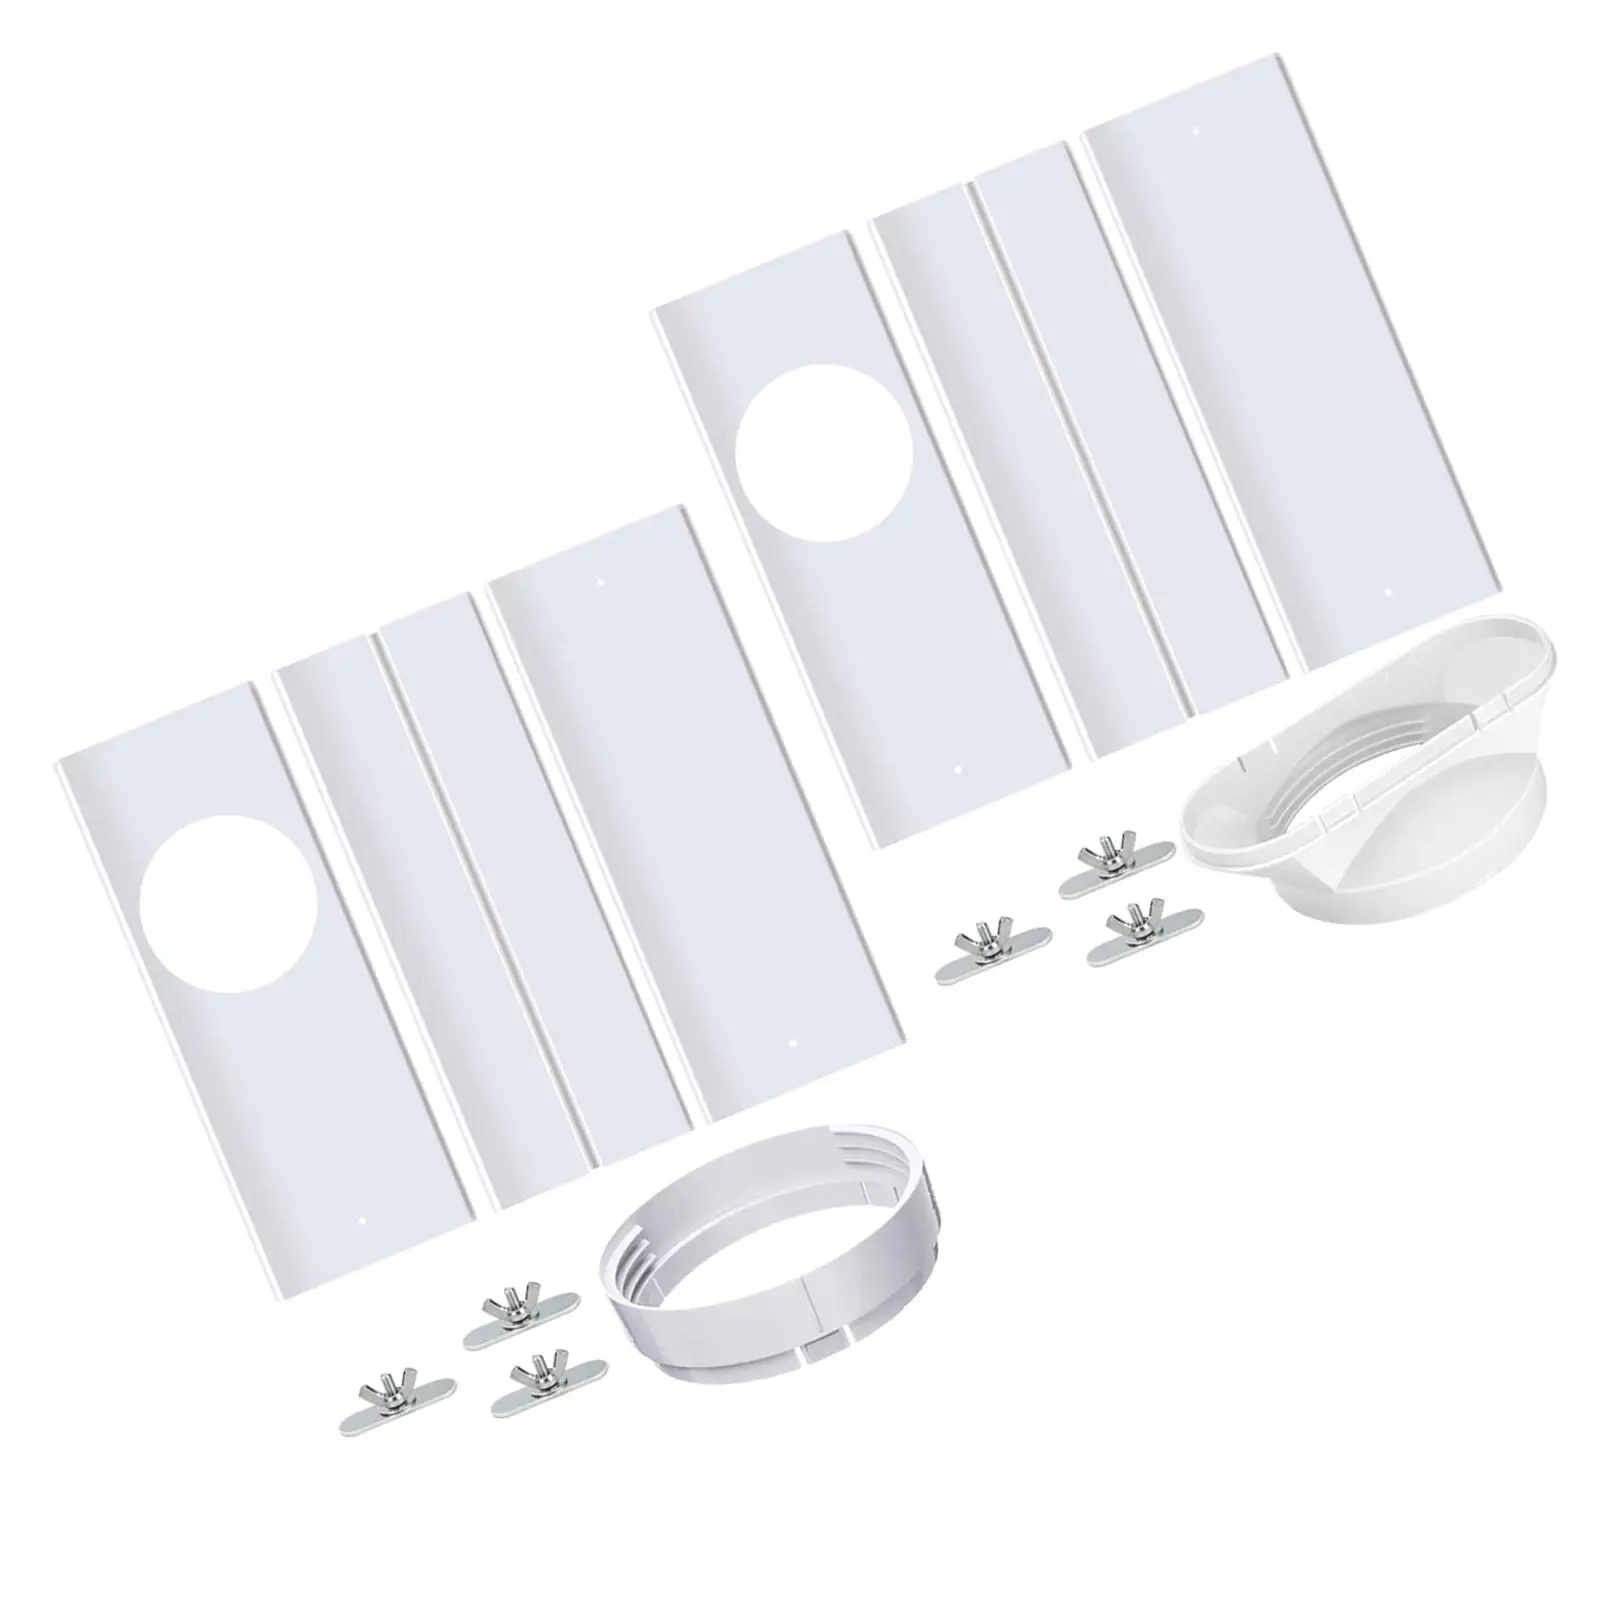 Conditioner Kit Seal Adapter Air Conditioner Window Kit for Window